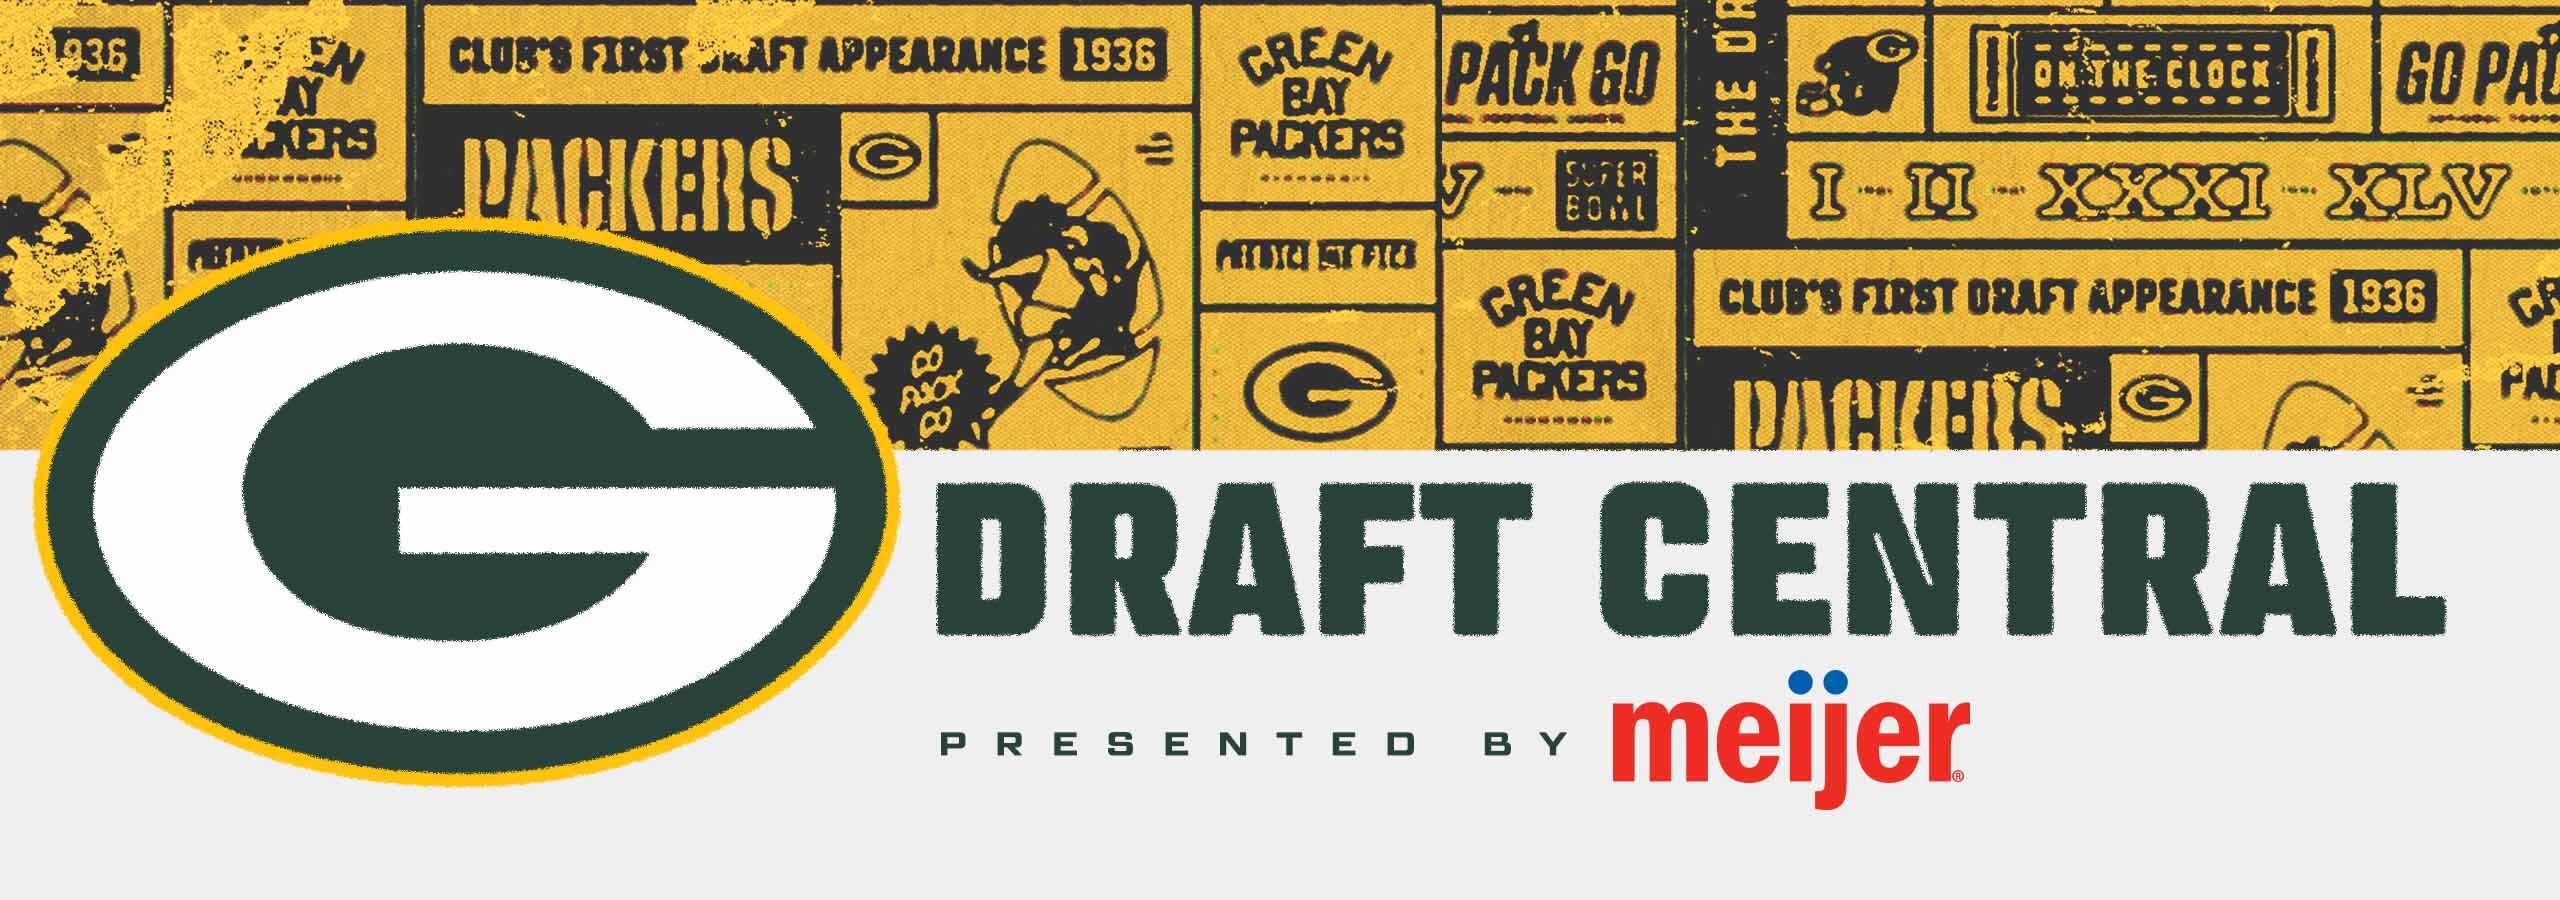 green bay packers 7 round mock draft